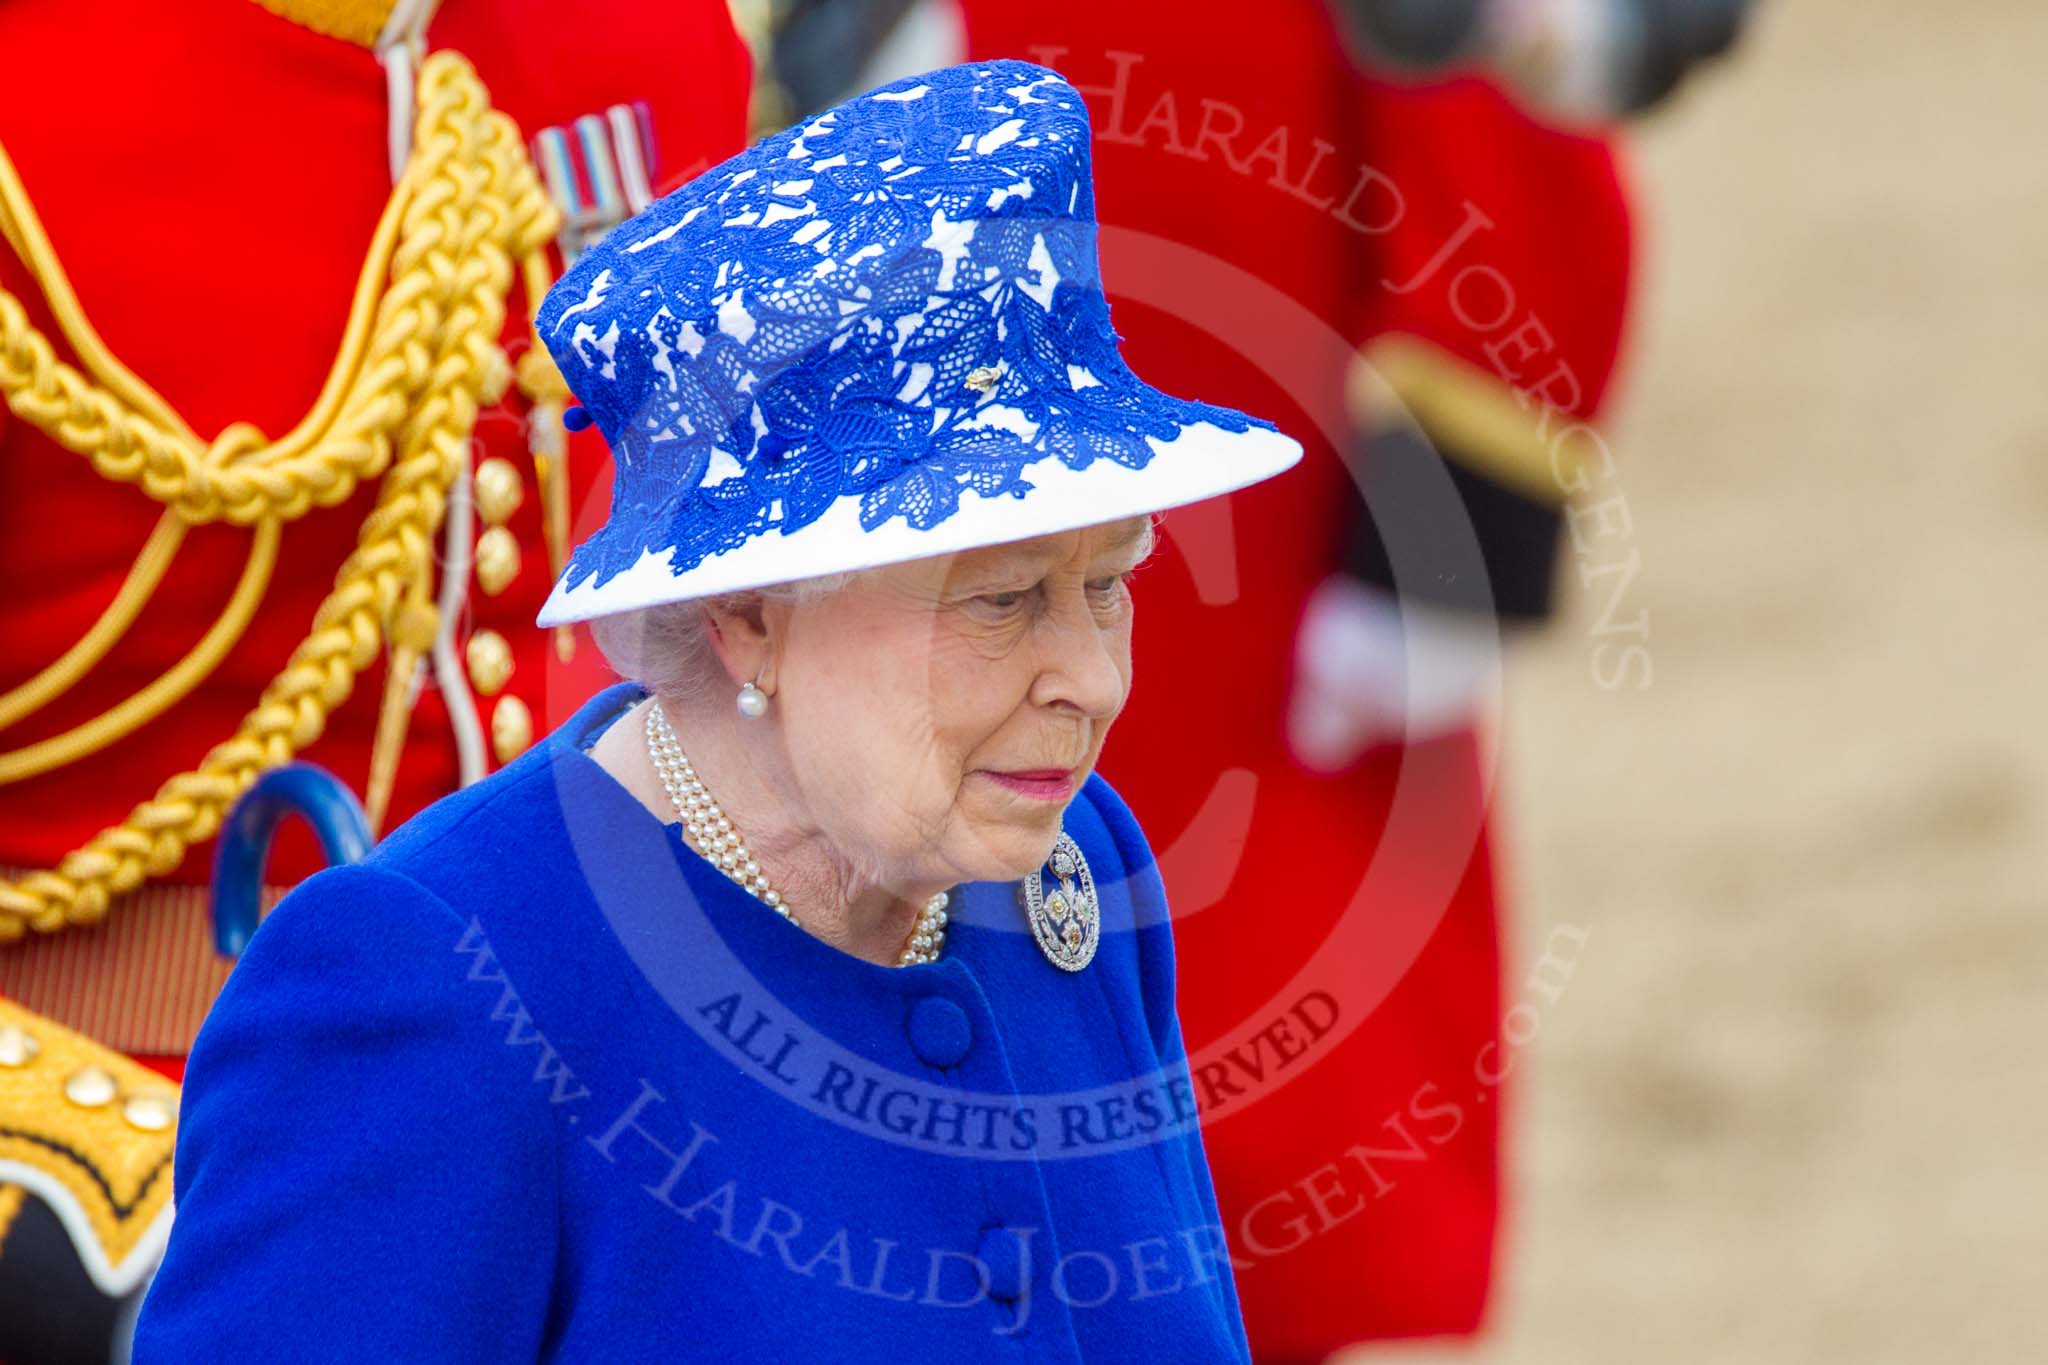 Trooping the Colour 2013: Close-up of HM The Queen on the way to dais after the Inspection of the Line..
Horse Guards Parade, Westminster,
London SW1,

United Kingdom,
on 15 June 2013 at 11:08, image #385